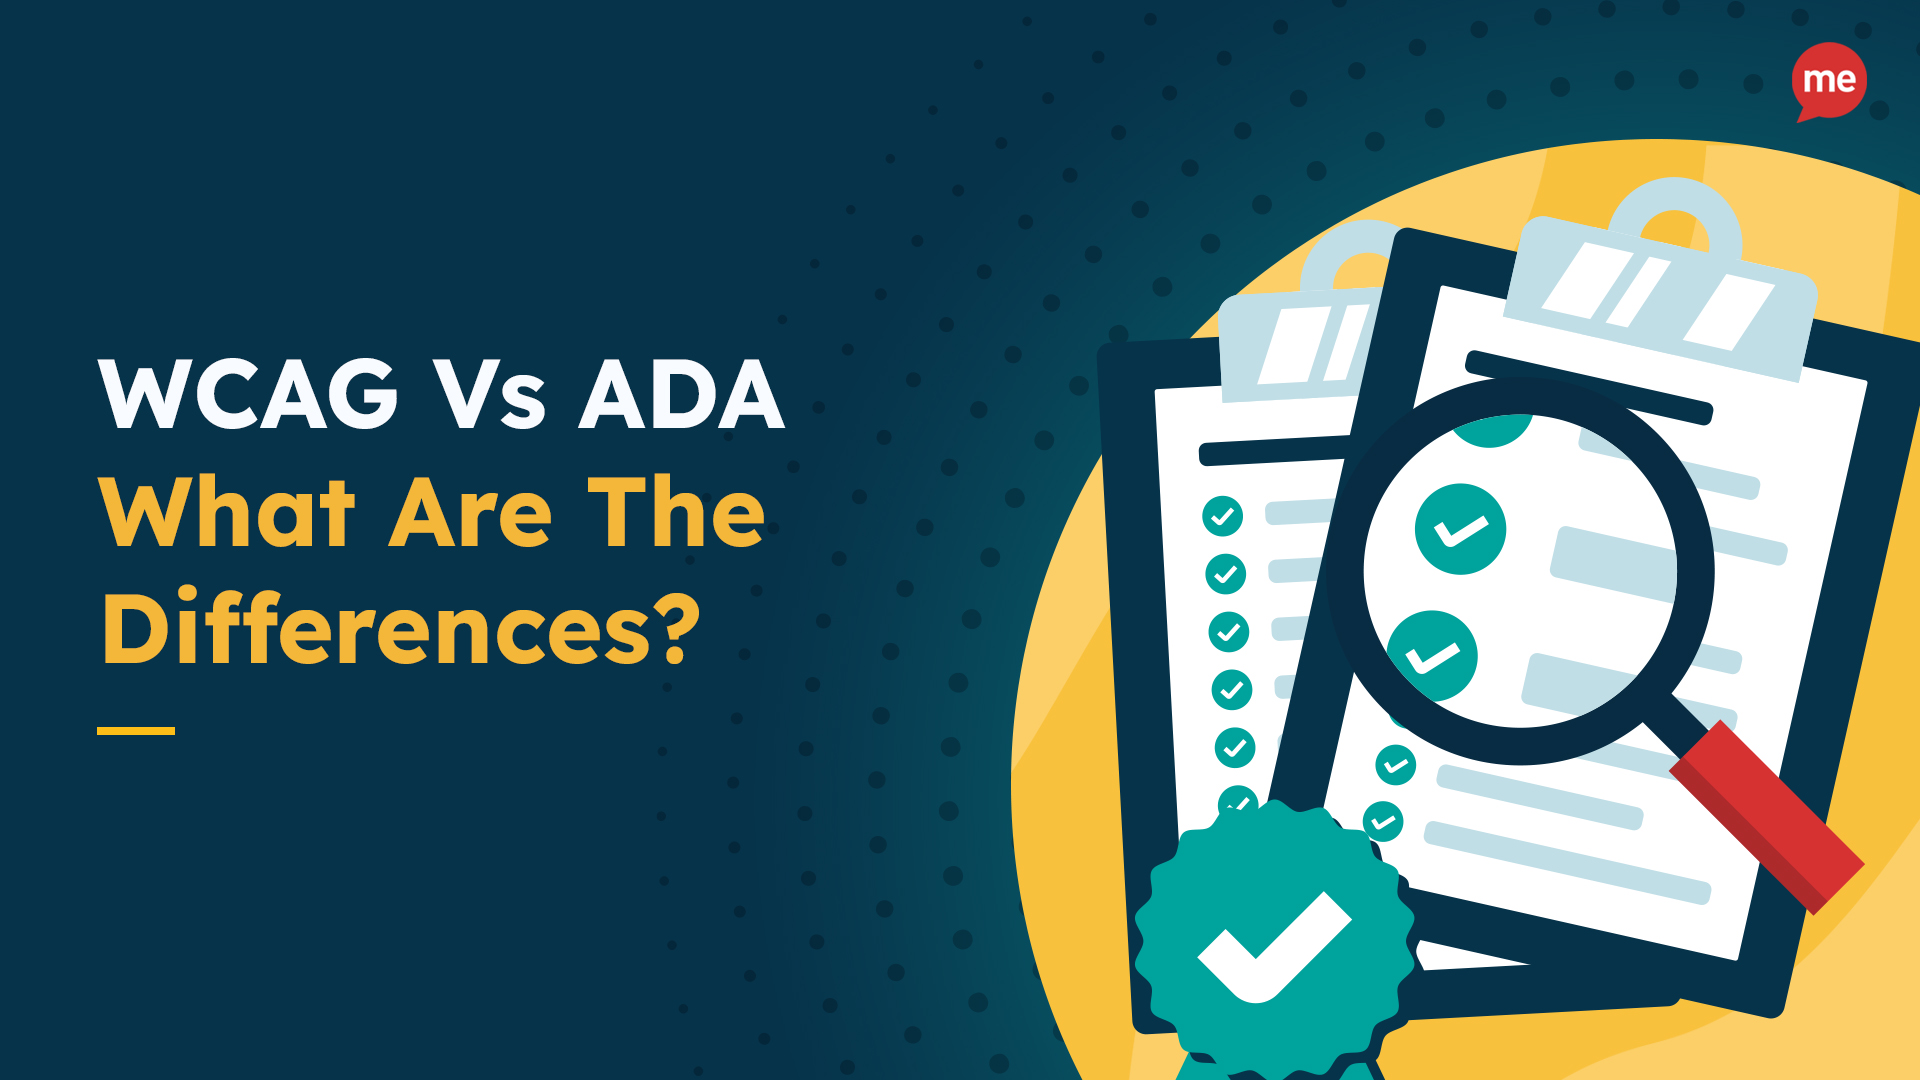 WCAG Vs ADA - What Are The Differences